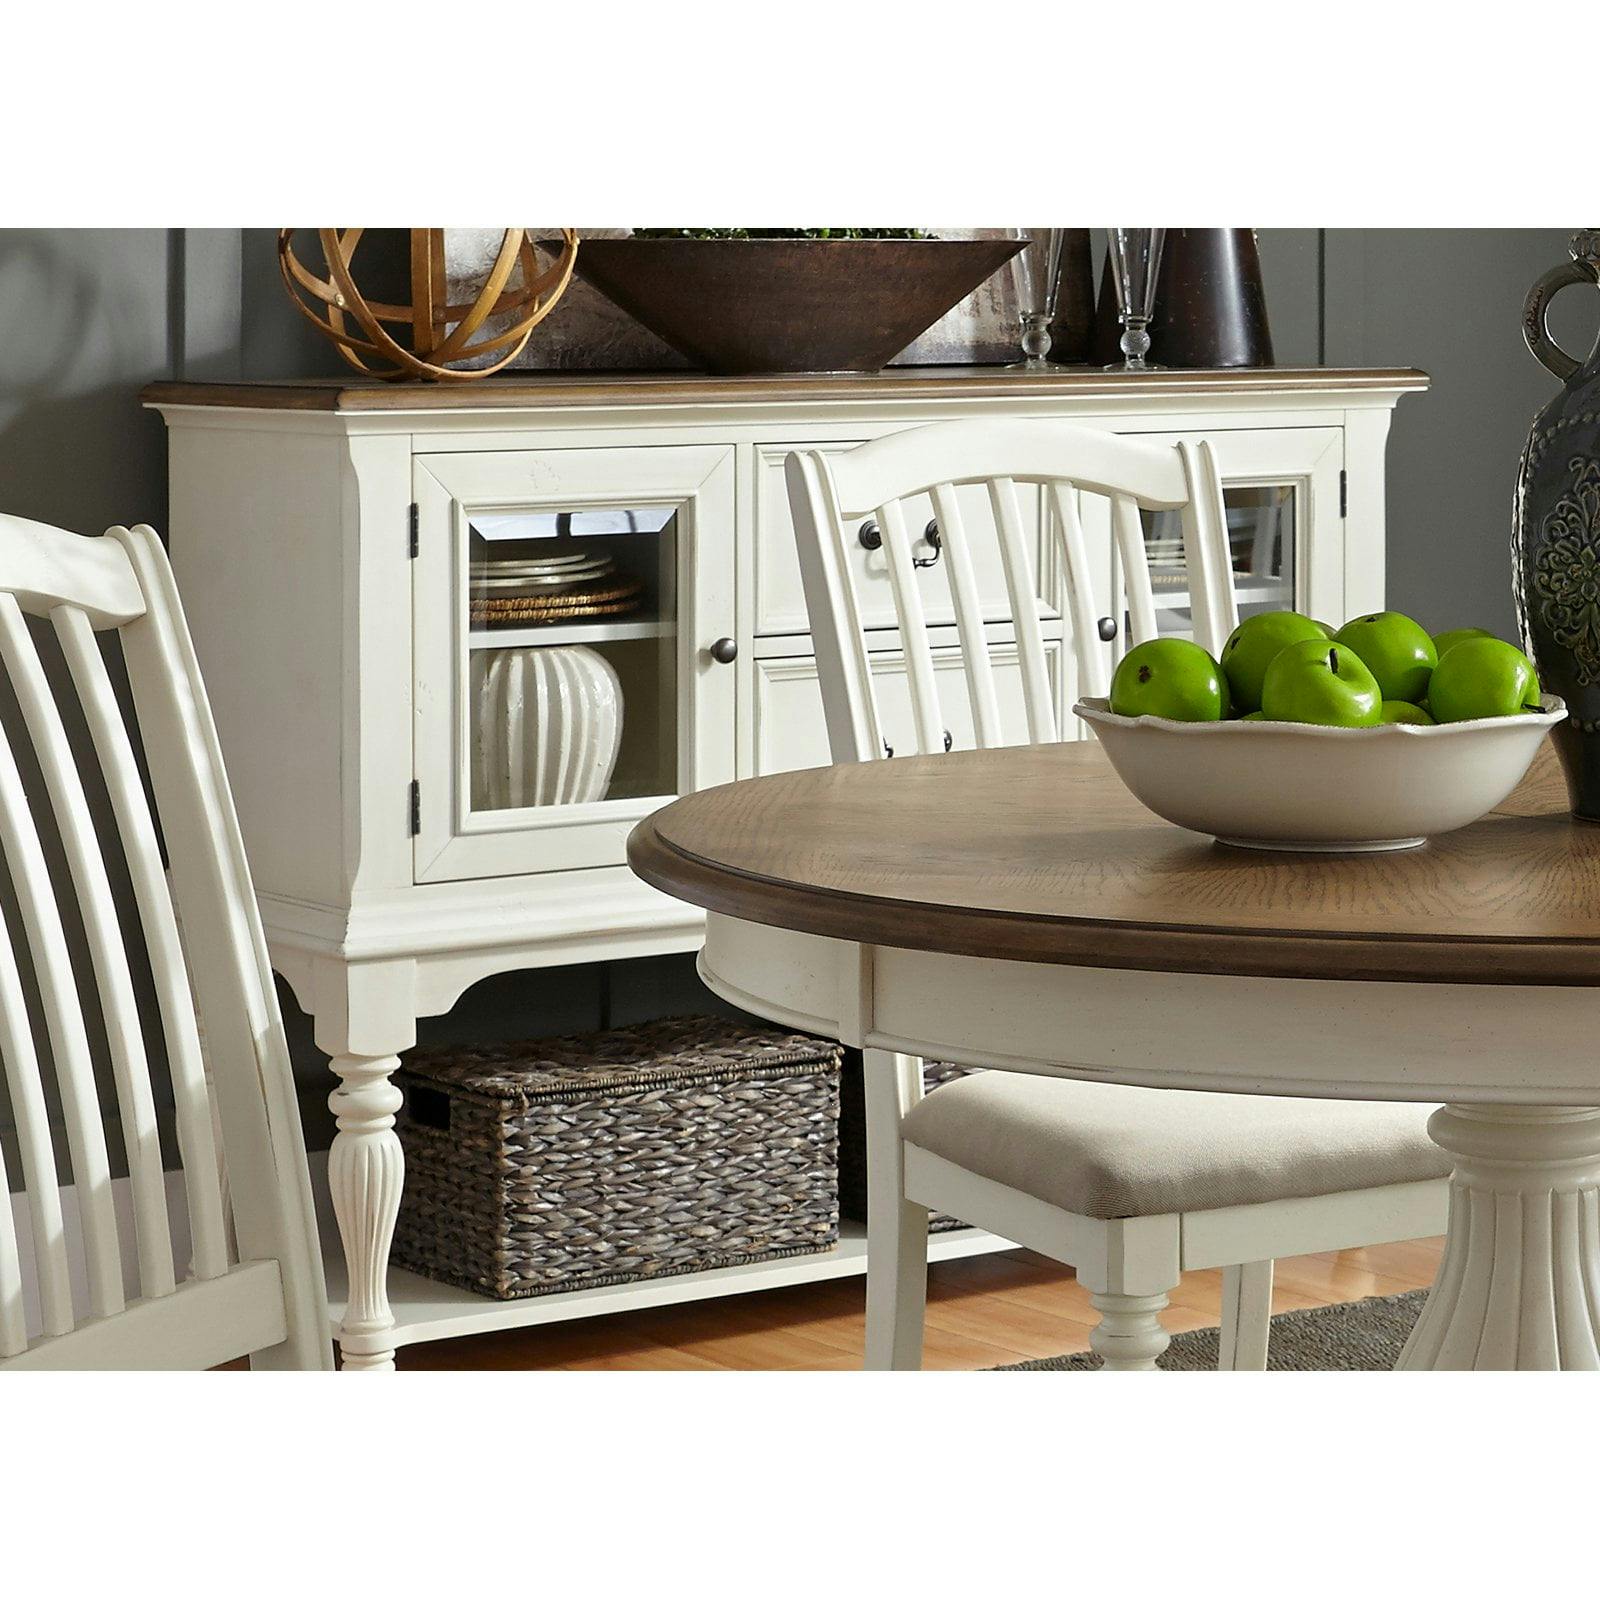 Cumberland Creek Two-Tone White and Nutmeg Server with Glass Doors